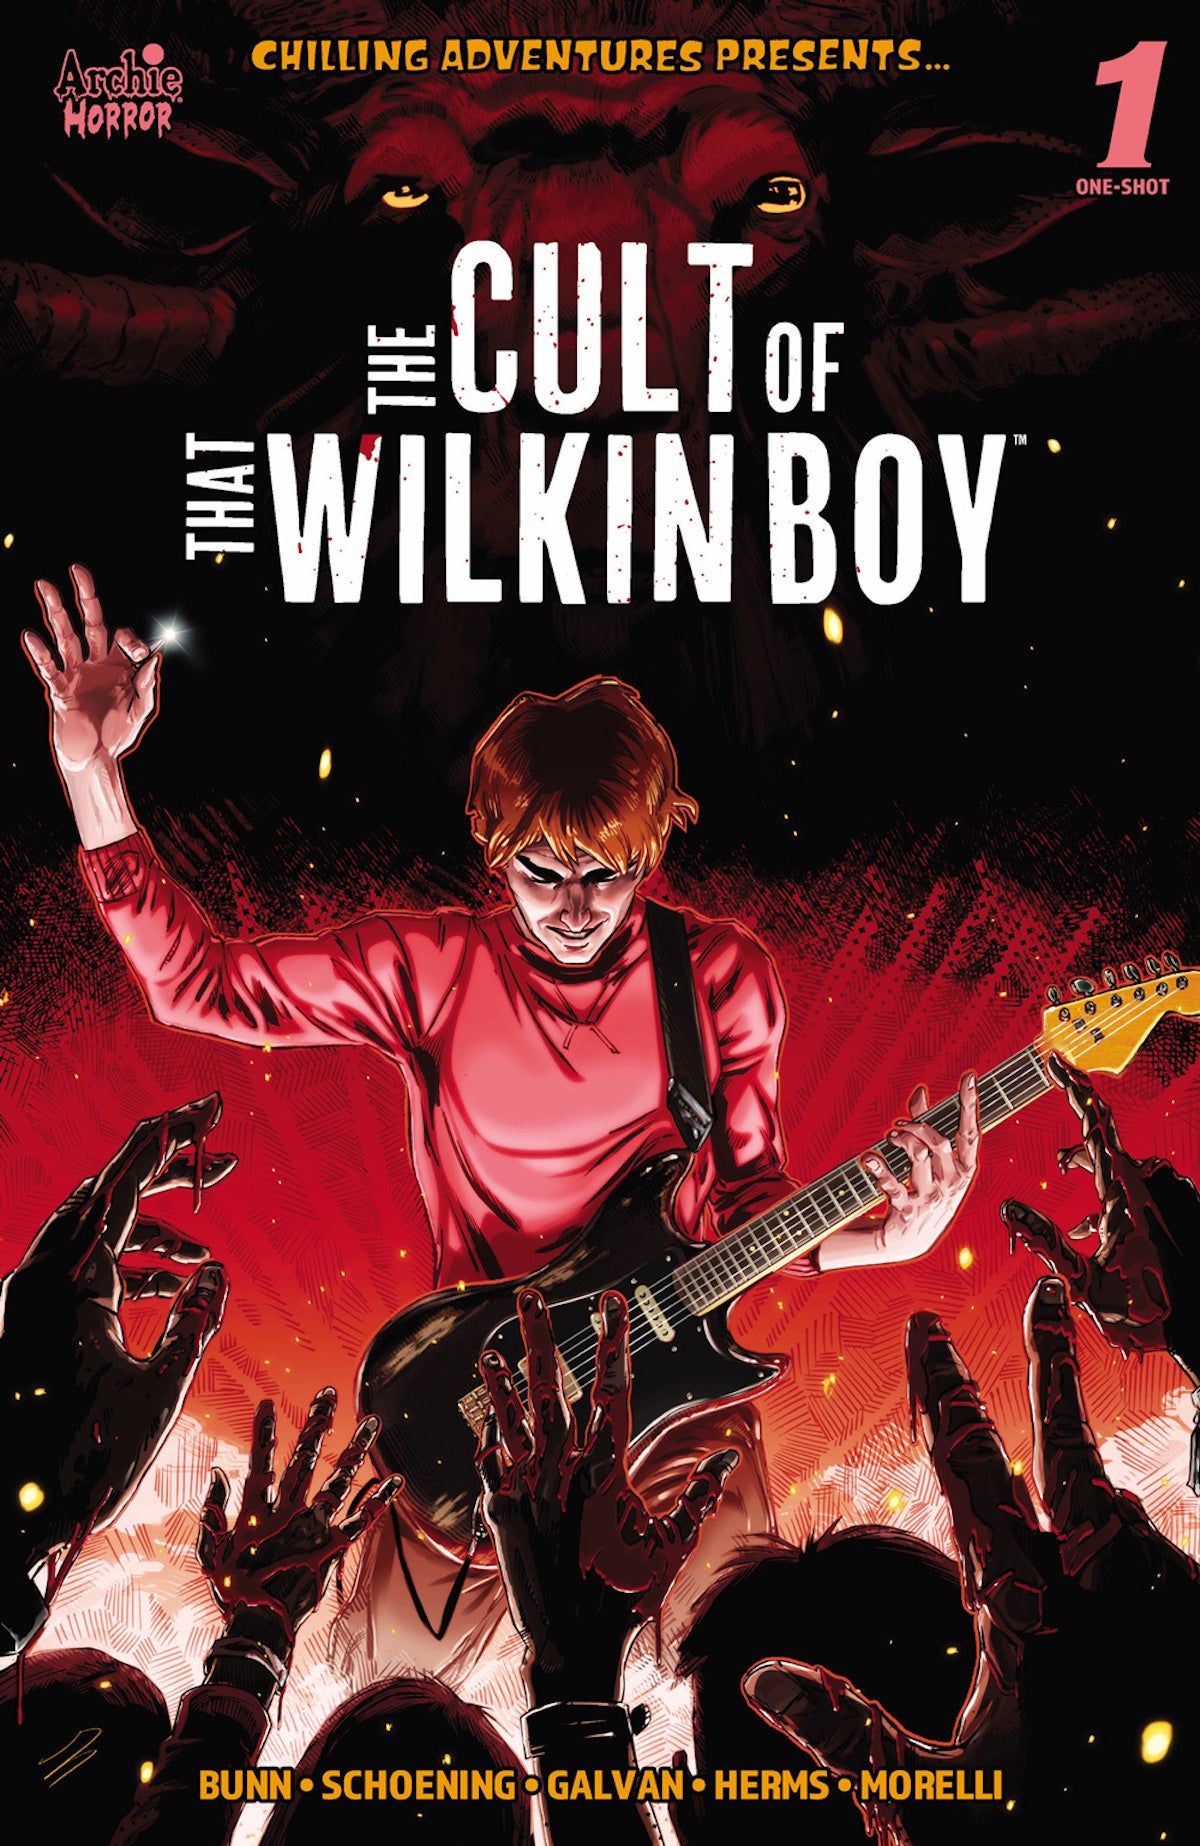 Chilling Adventures Presents... The Cult of That Wilkin Boy